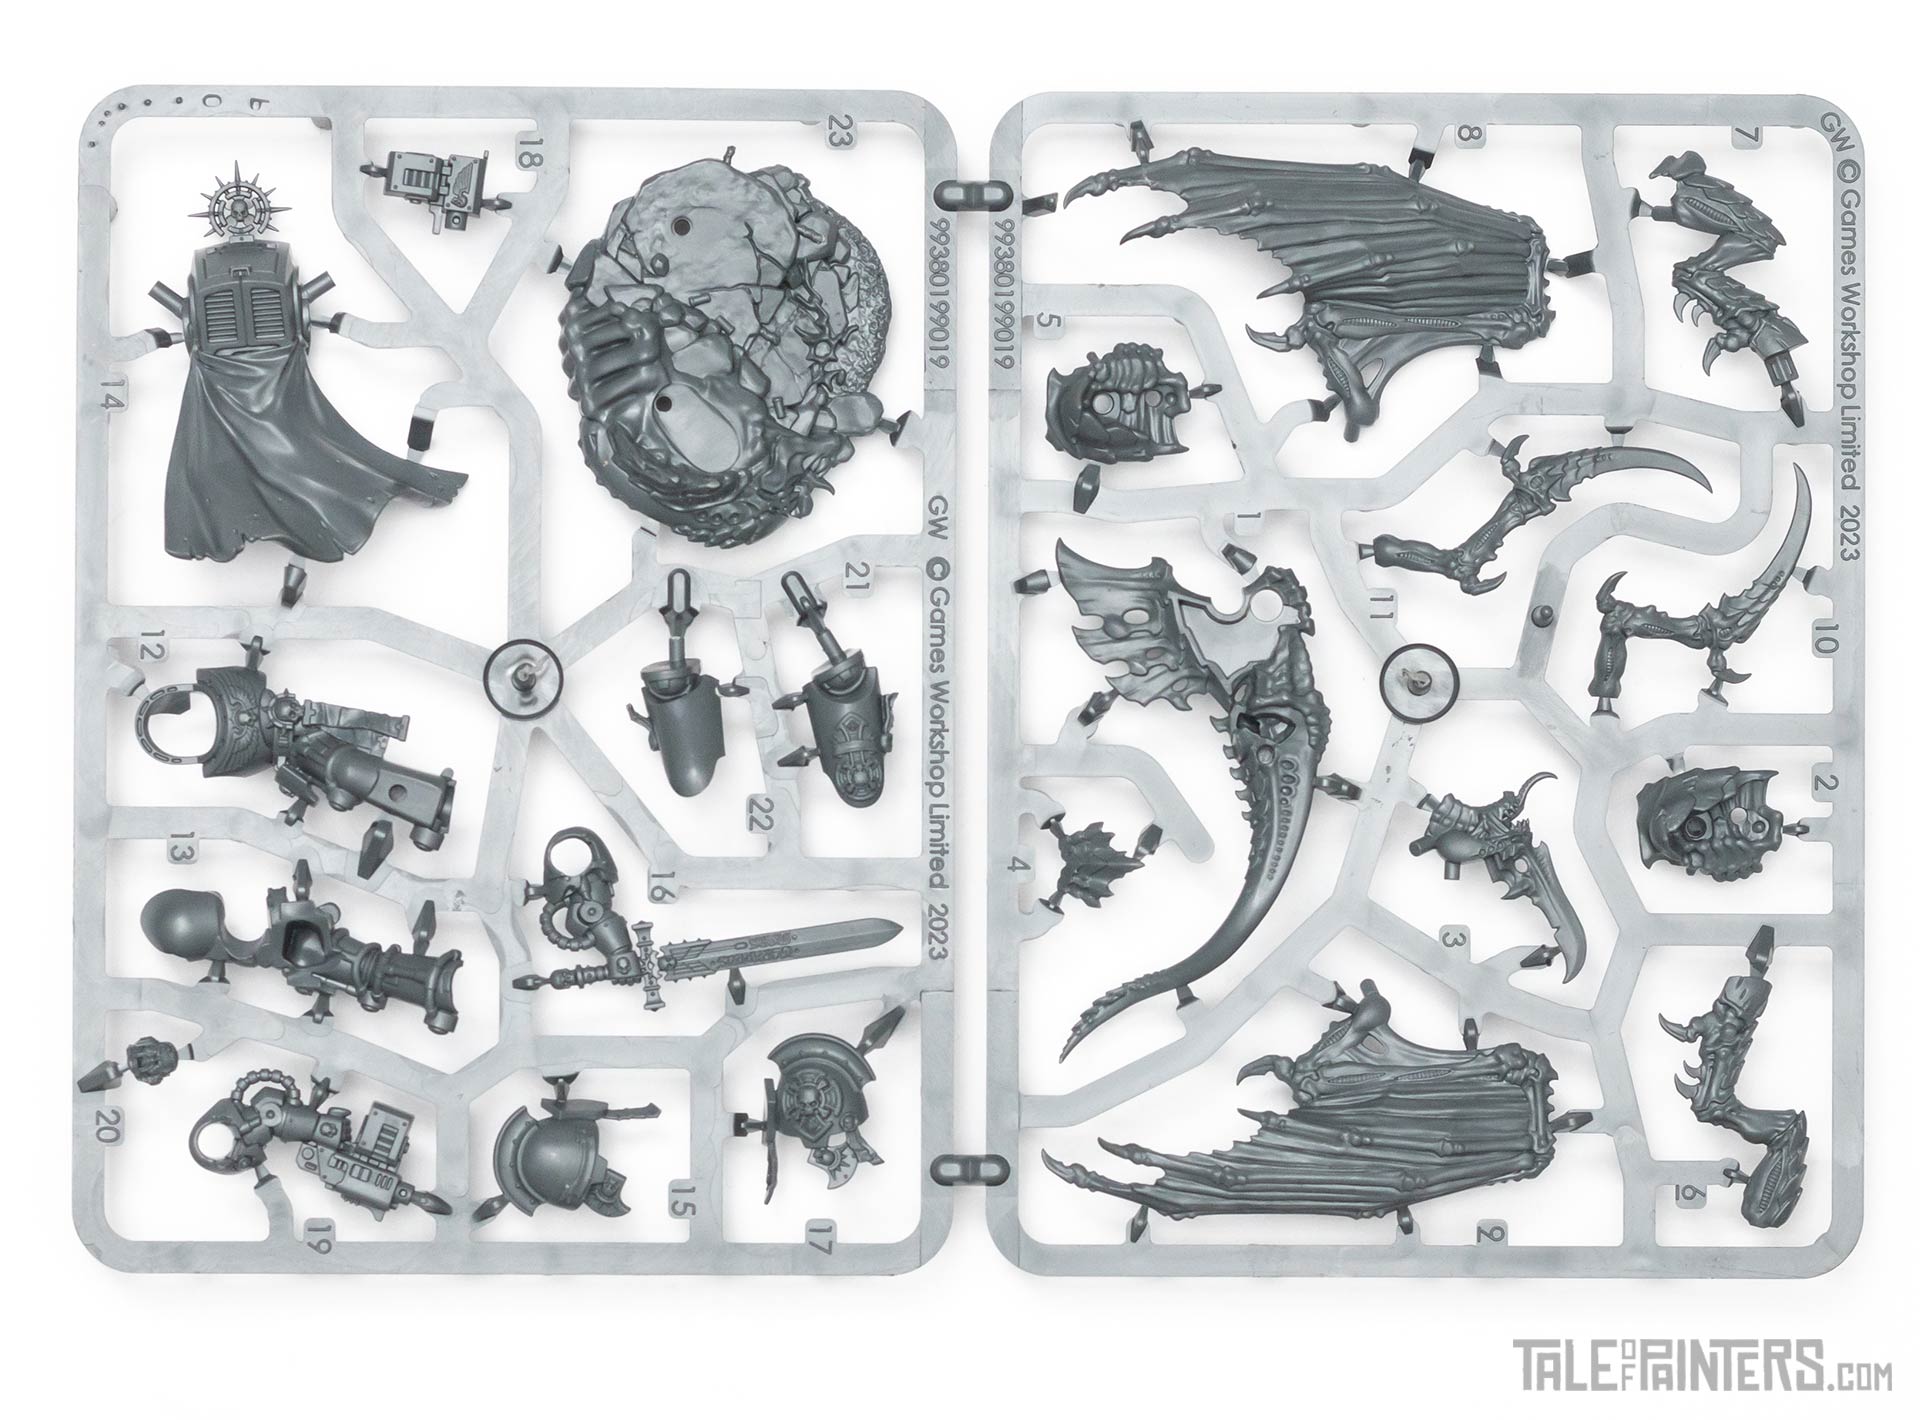 Leviathan Terminator Captain and Winged Tyranid Prime sprues